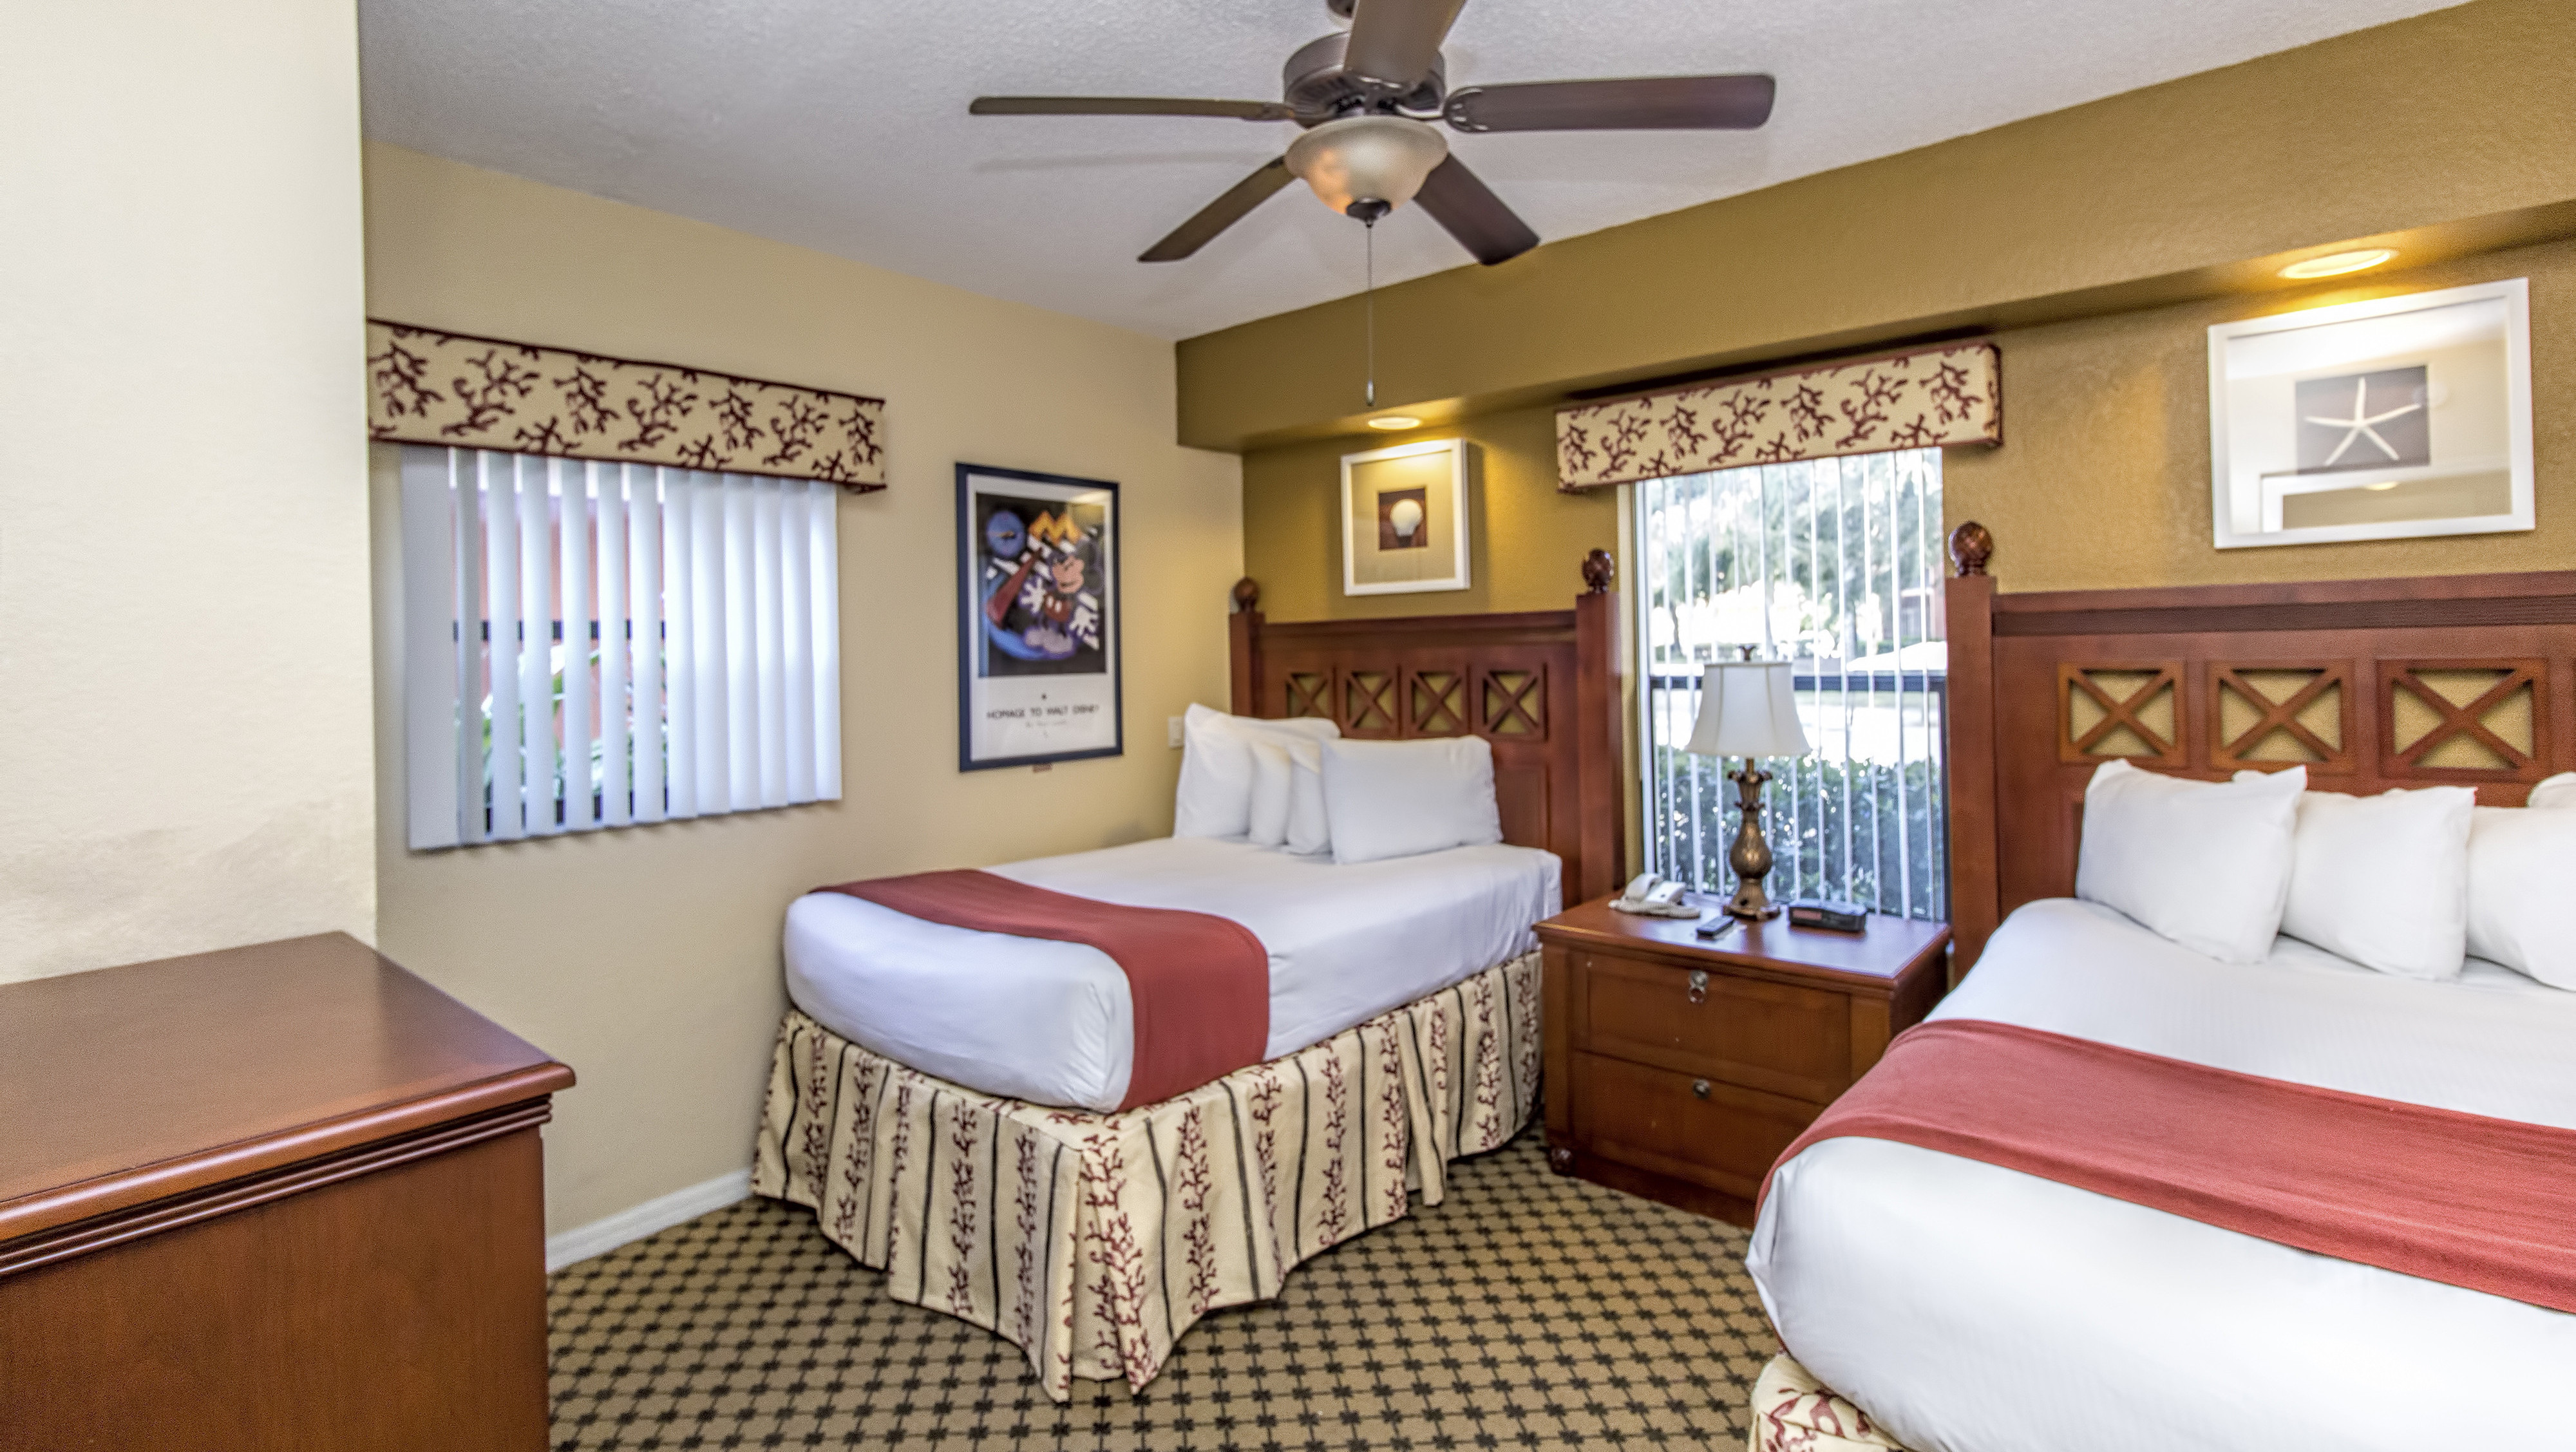 Featured image of post 3 Bedroom Westgate Smoky Mountain Resort Floor Plans / All of the rooms at the westgate smoky mountain resort are billed as villas.